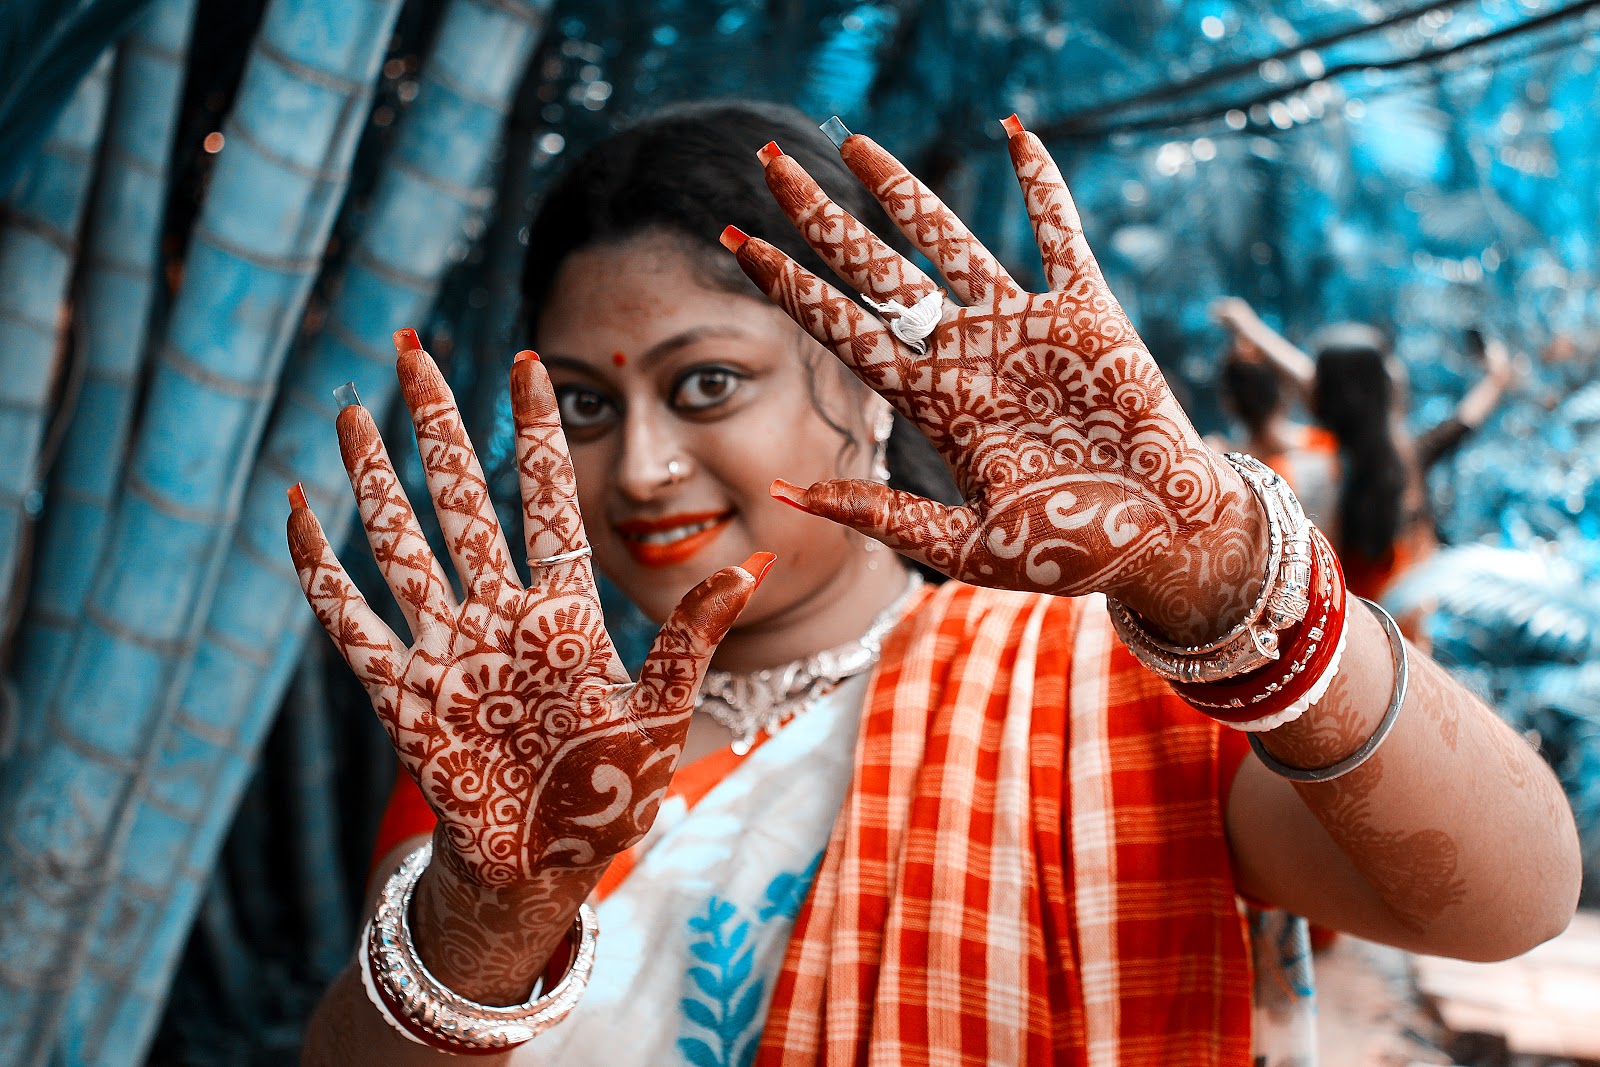 Weddingz.in - These bridal mehendi designs are just love!... | Facebook